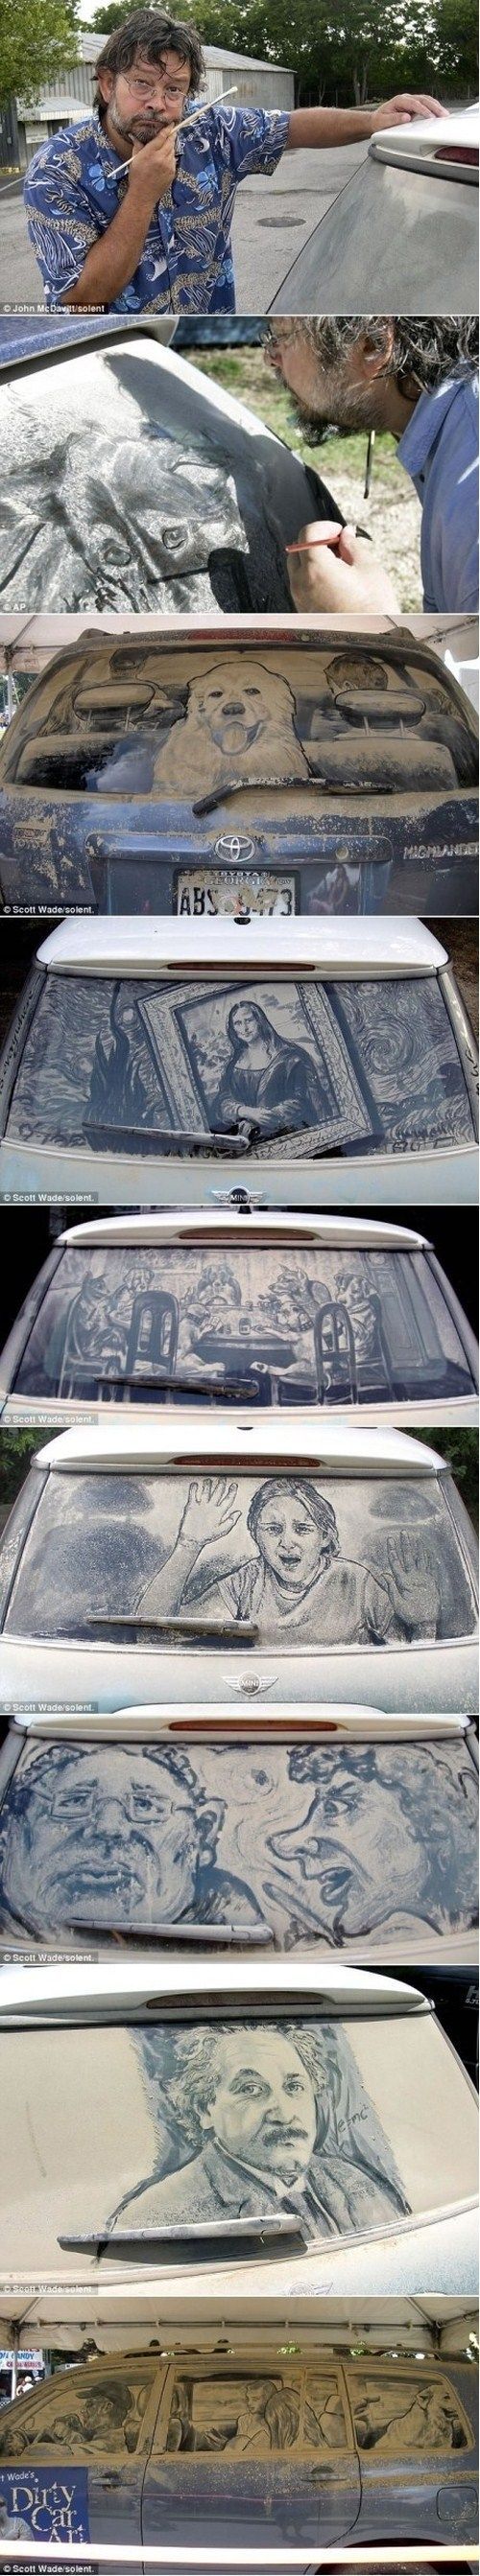 Dirty car art Ive missed my calling..